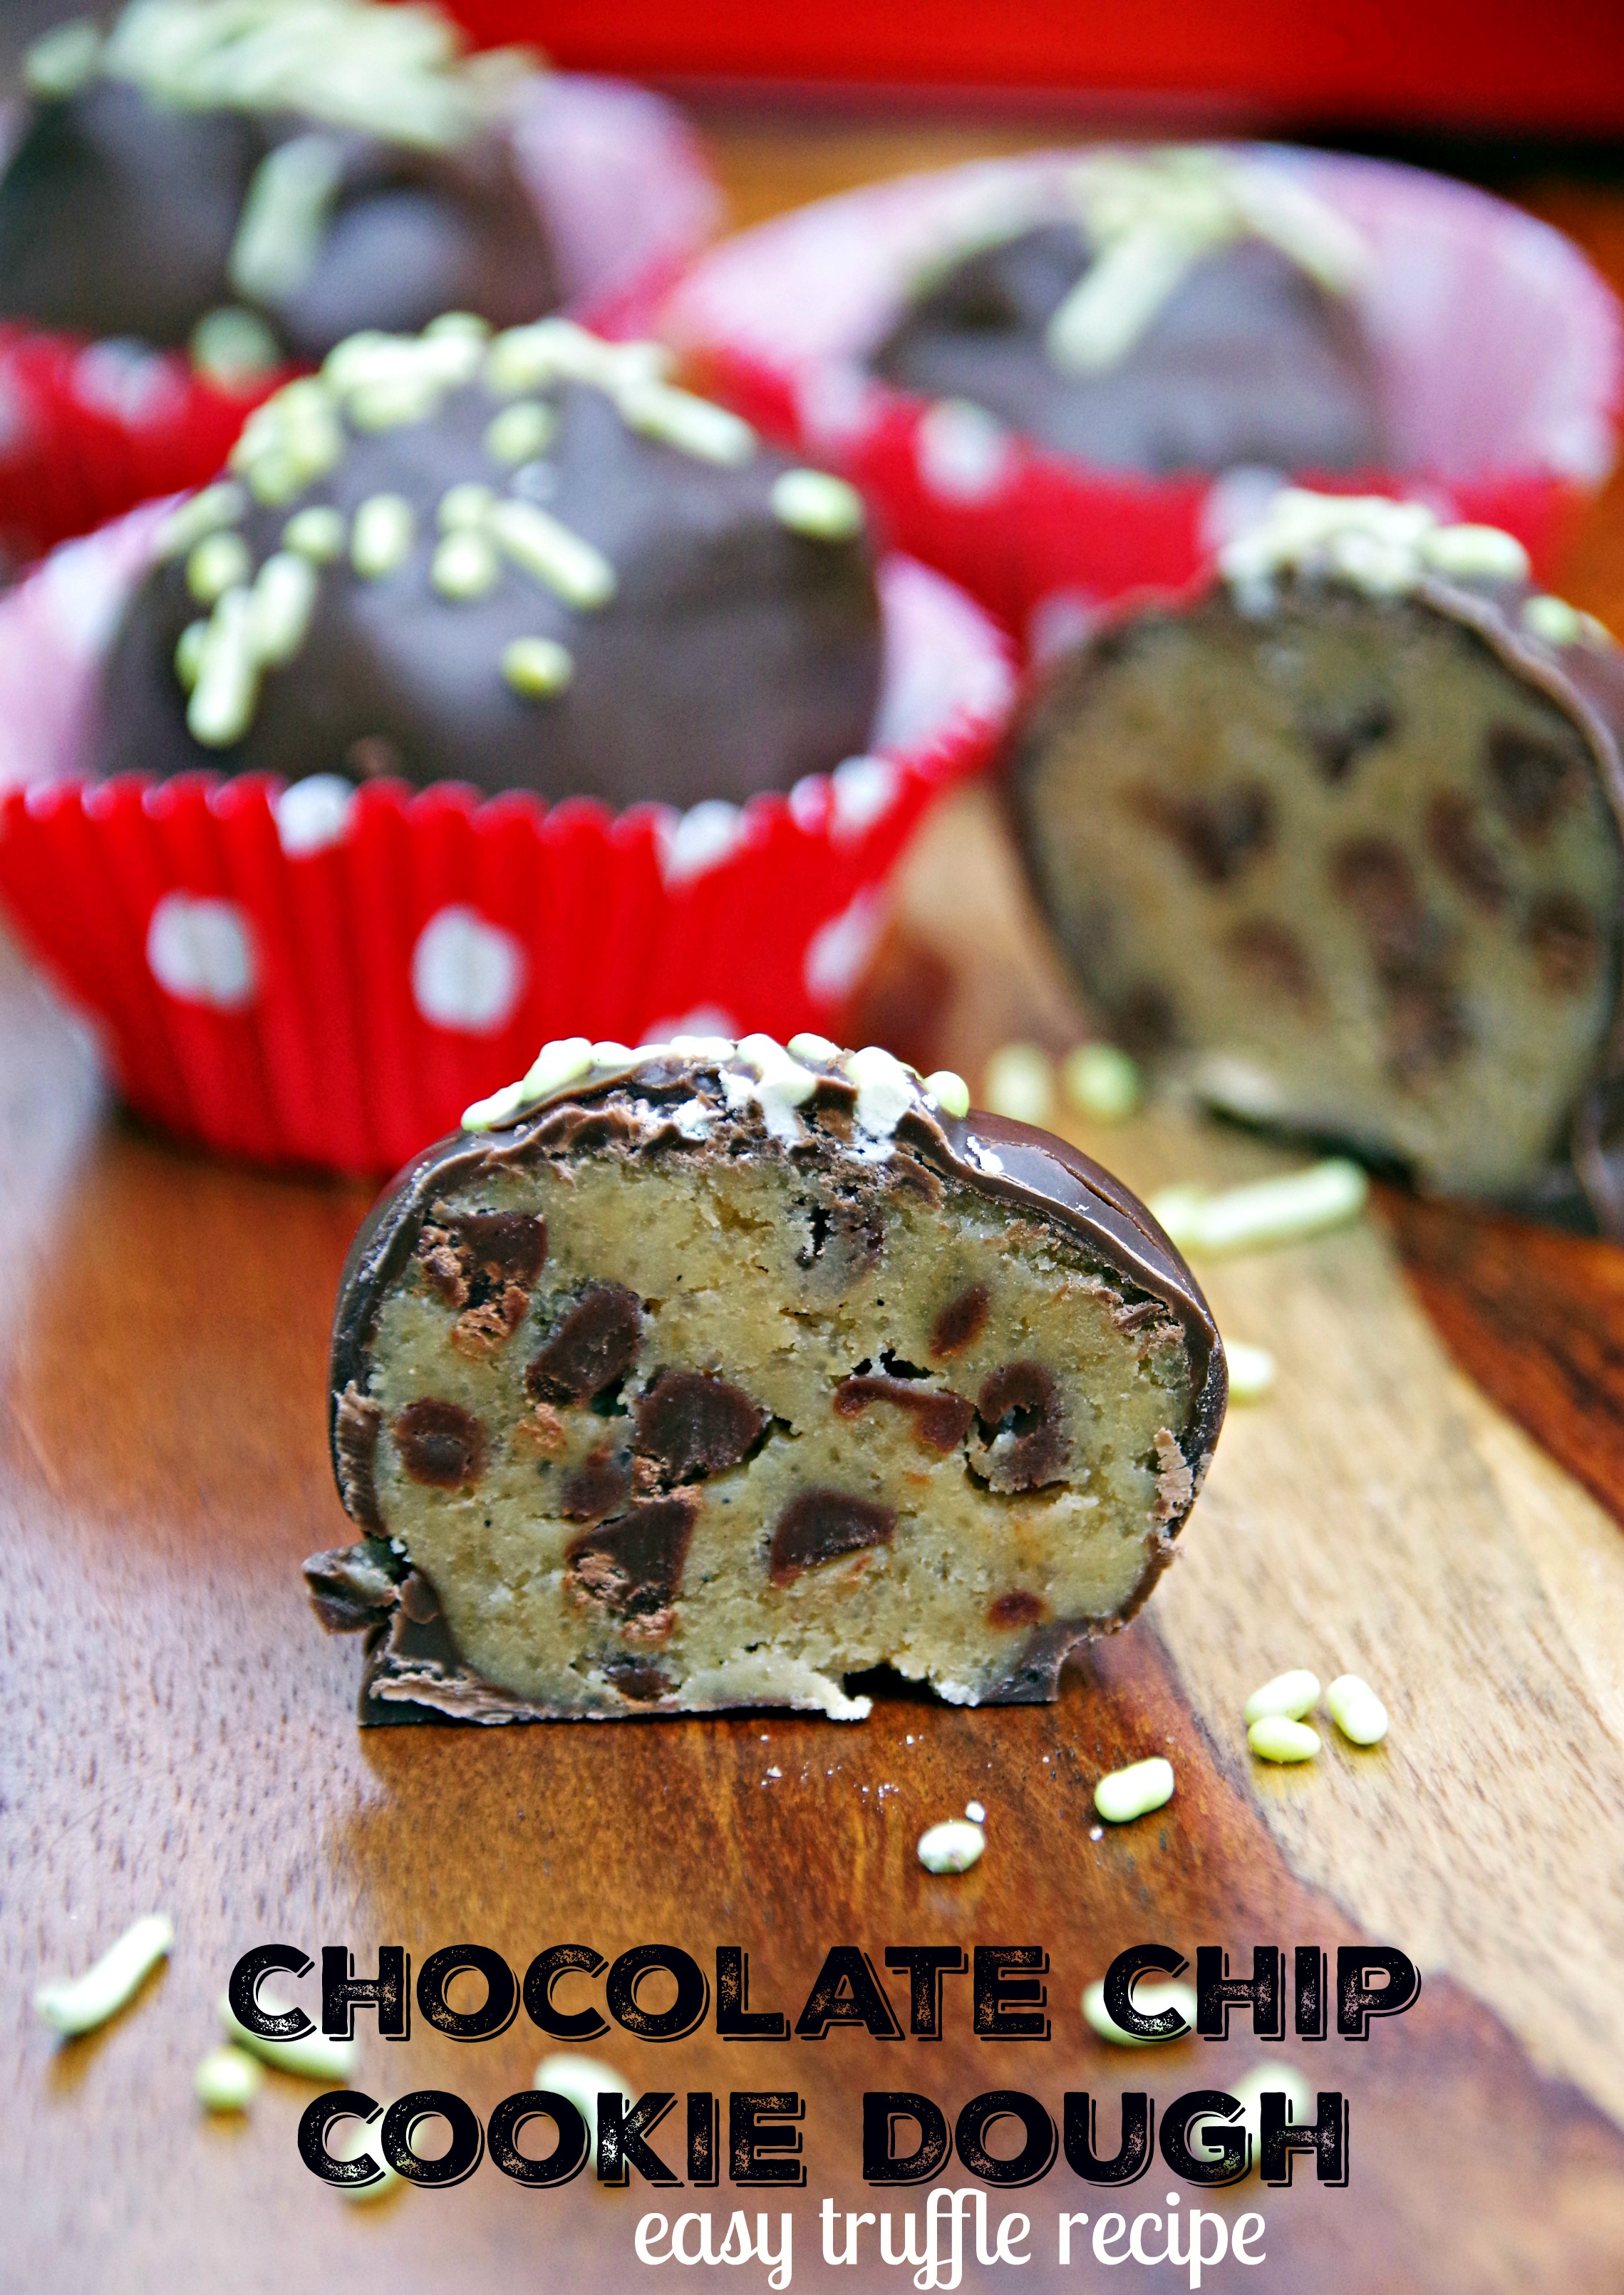 Chcolate Chip Cookie Dough Truffle Recipe is an Easy Homemade Gift or a Delicious Dessert Recipe for Any Night of the Week